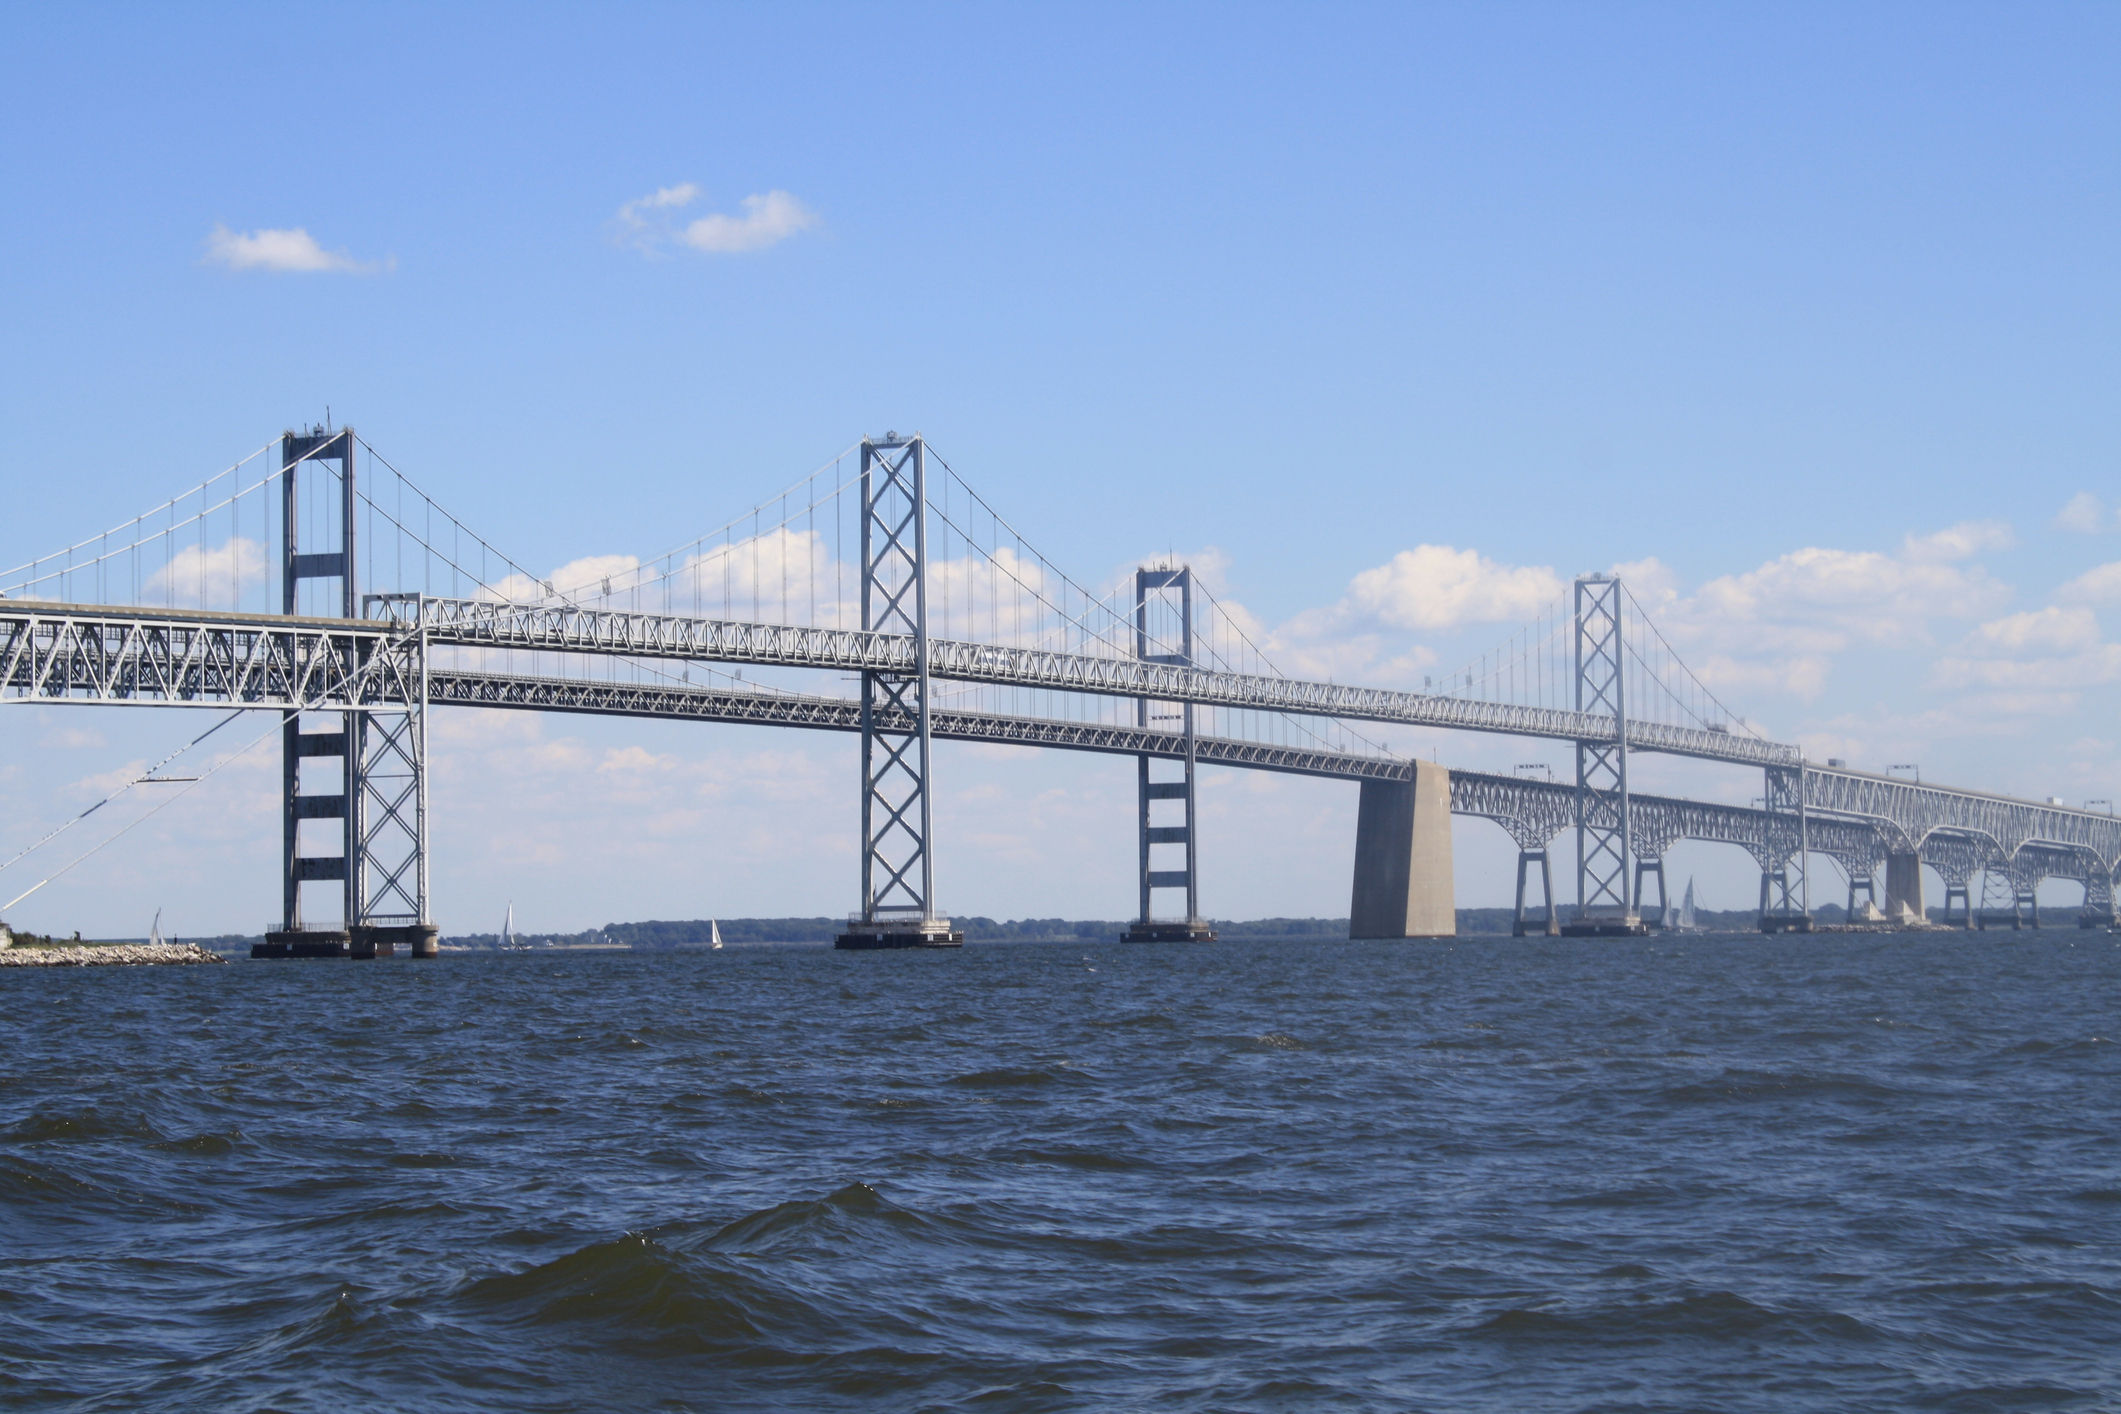 What goes into decision to close Chesapeake Bay Bridge? | WTOP